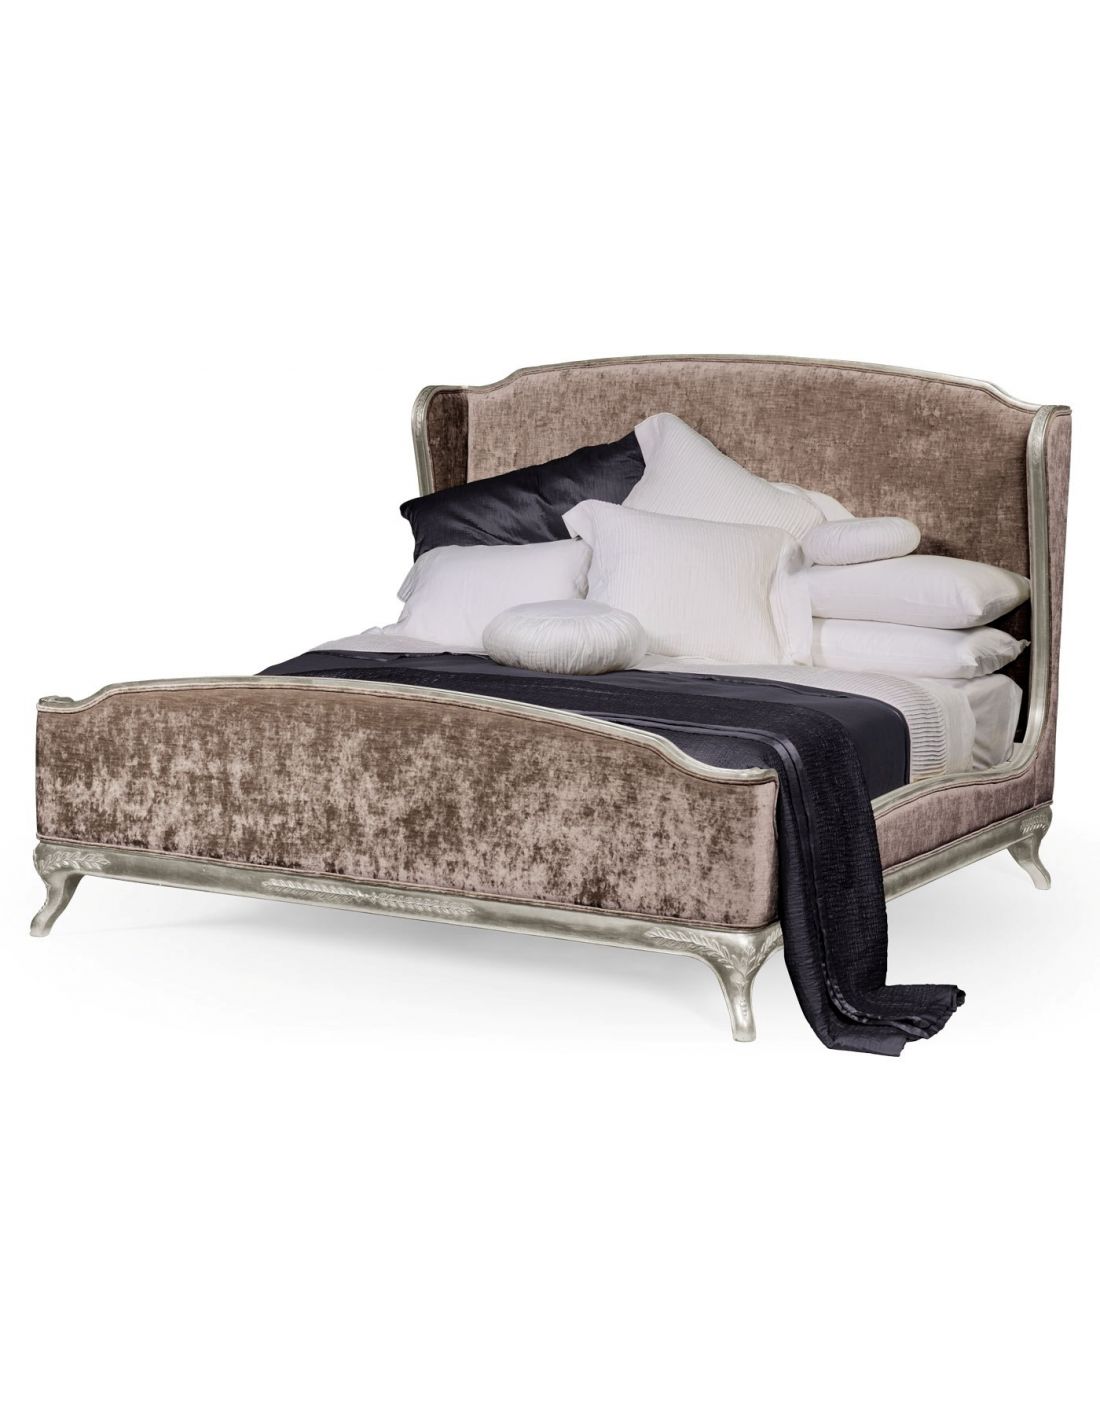 French Style Wingback King Bed Truffle, Black Truffle Bed Frame